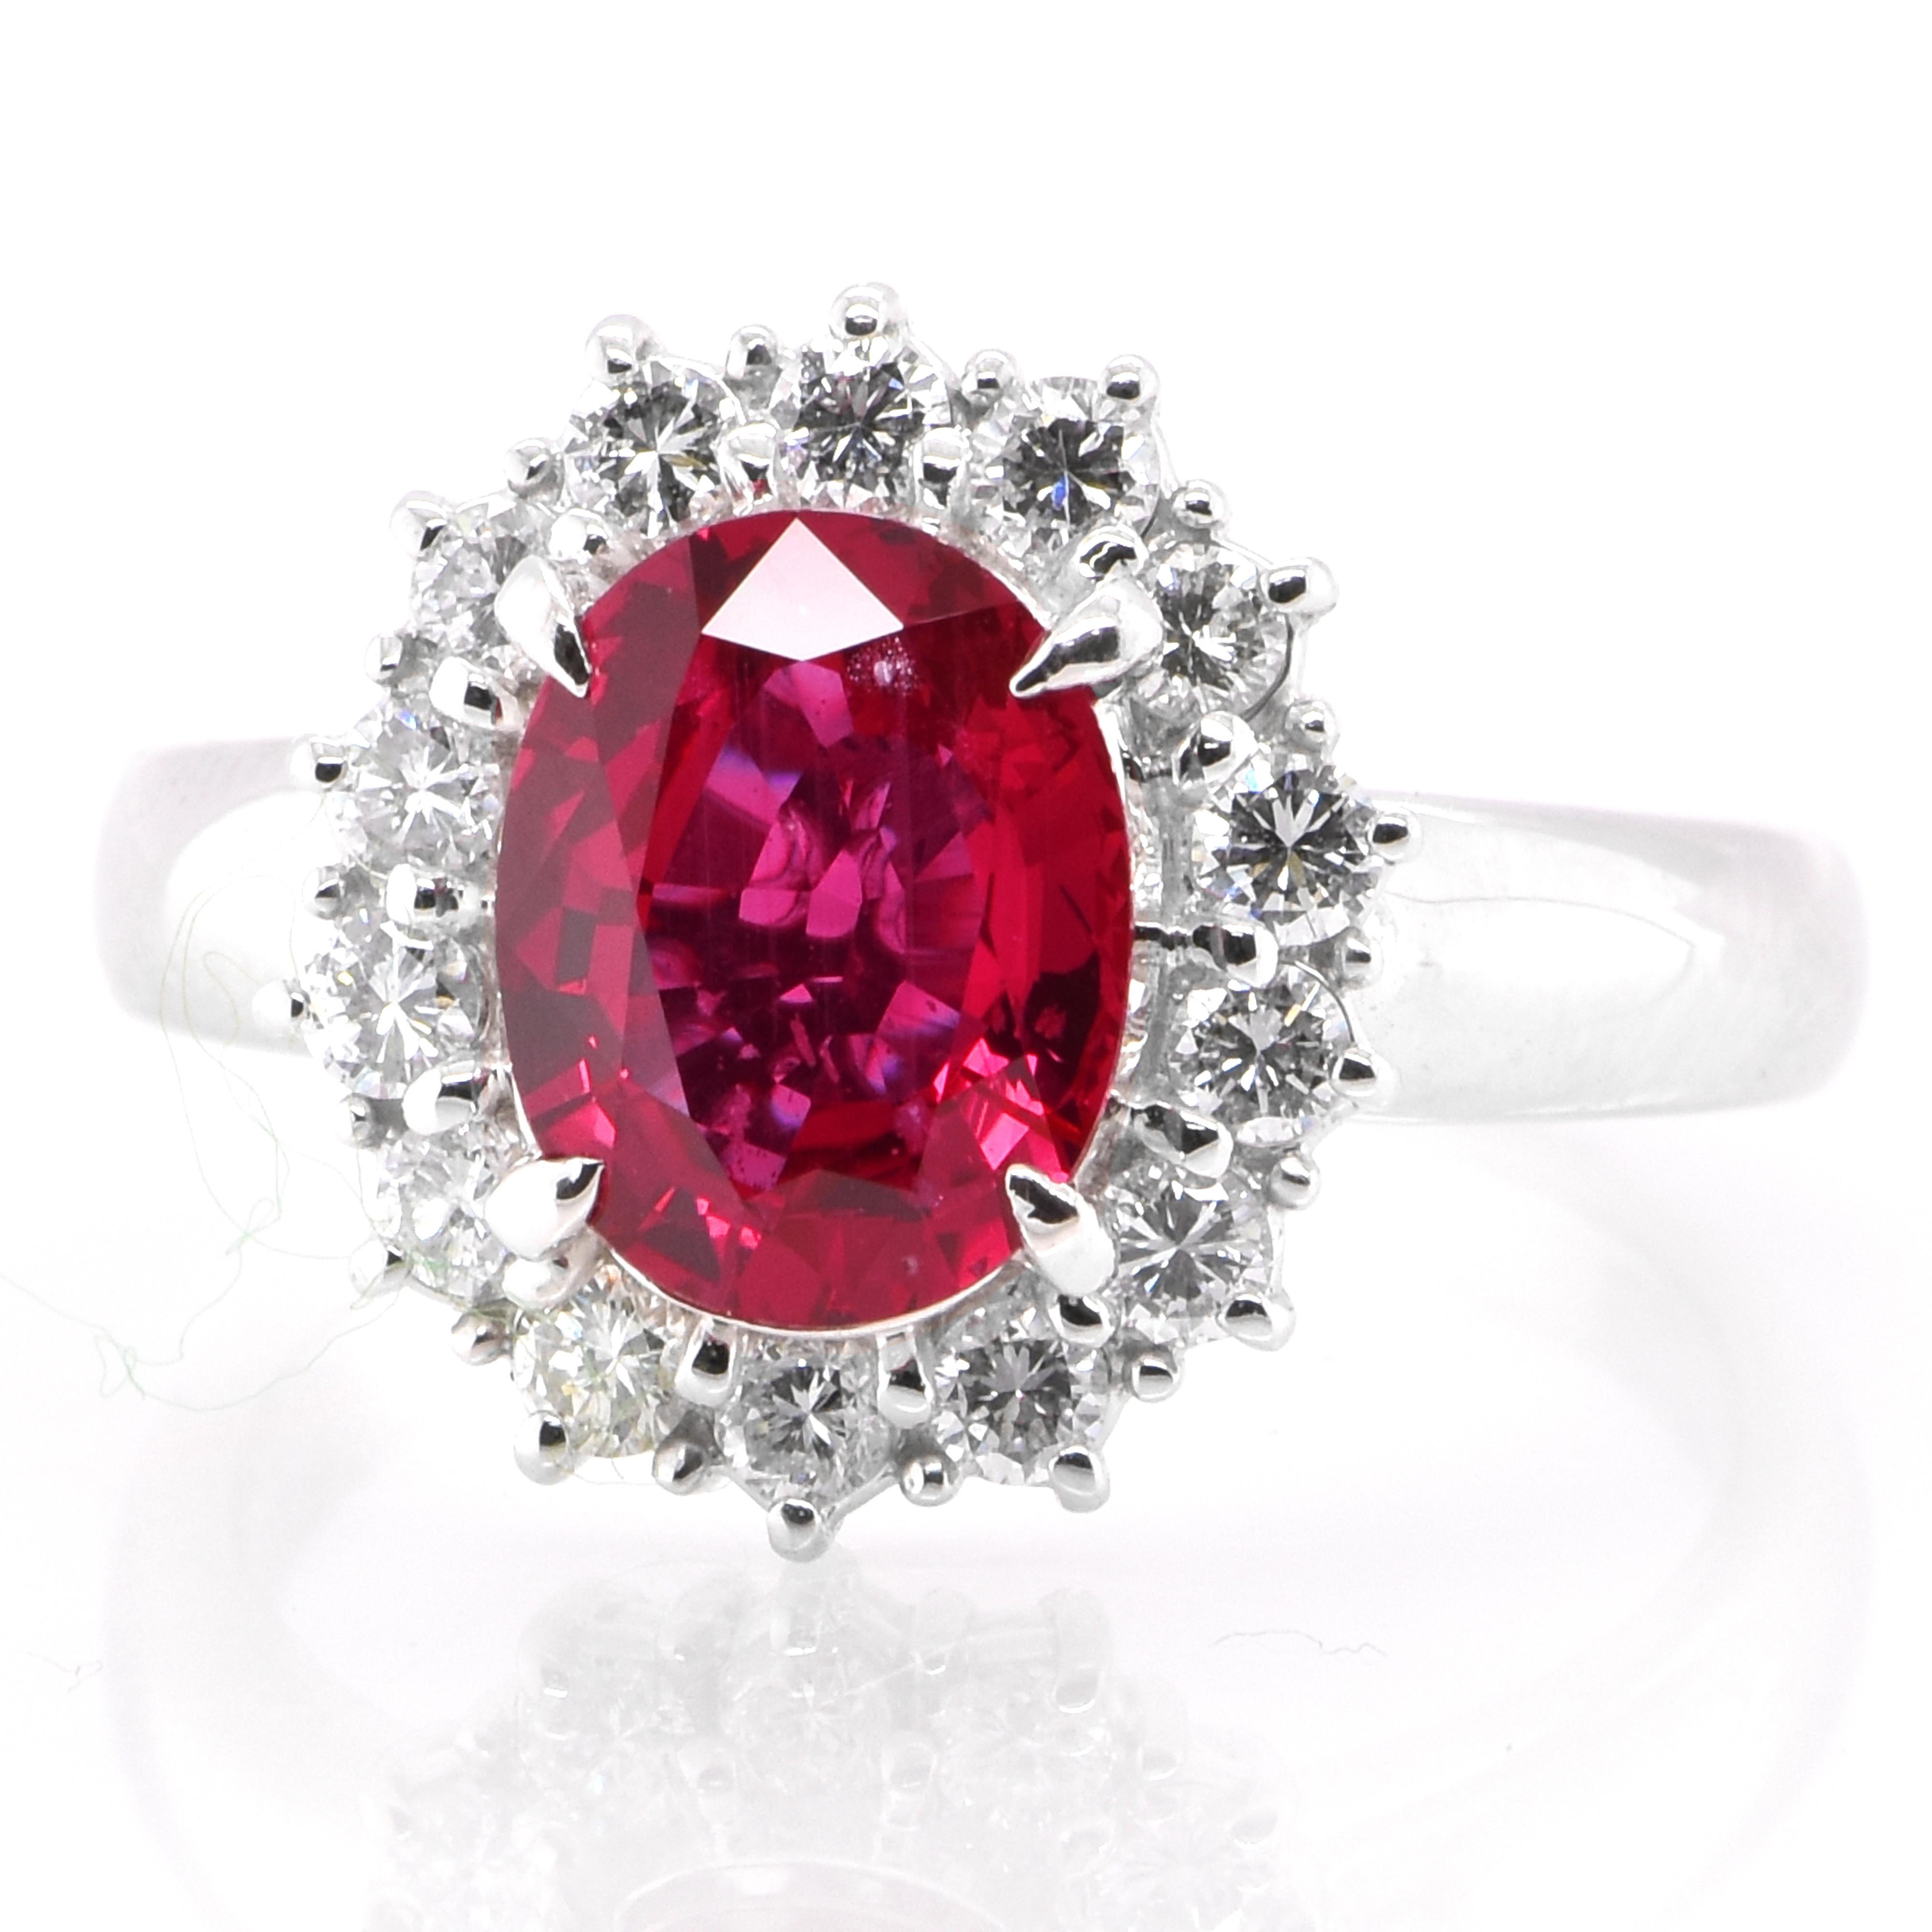 A beautiful ring set in Platinum featuring a GIA Certified 2.17 Carat Natural Untreated, Mozambique Ruby and 0.47 Carat Diamonds. Rubies are referred to as 